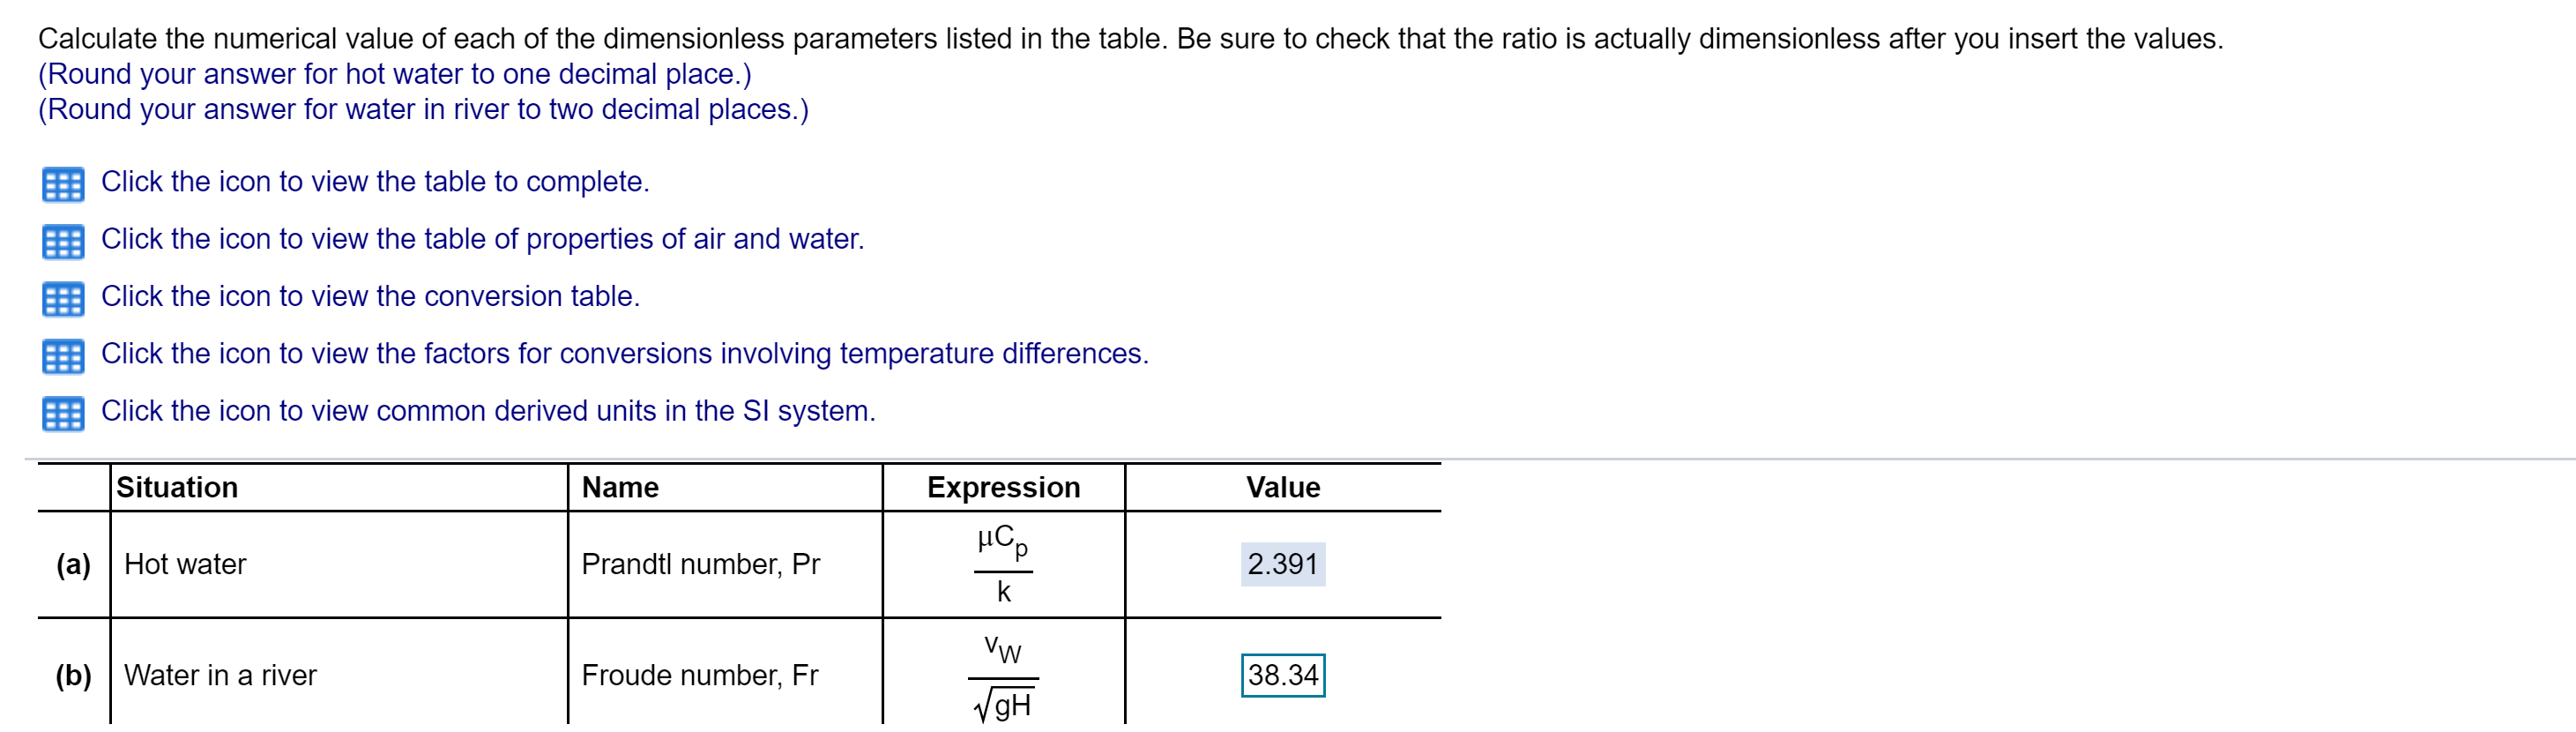 Calculate the numerical value of each of the dimensionless parameters listed in the table. Be sure to check that the ratio is actually dimensionless after you insert the values.
(Round your answer for hot water to one decimal place.)
(Round your answer for water in river to two decimal places.)
Click the icon to view the table to complete.
Click the icon to view the table of properties of air and water.
Click the icon to view the conversion table.
Click the icon to view the factors for conversions involving temperature differences.
Click the icon to view common derived units in the Sl system
Situation
Name
Expression
Value
Prandtl number, Pr
(a)Hot water
2.391
k
Vw
38.34
(b) Water in a river
Froude number, Fr
gH
